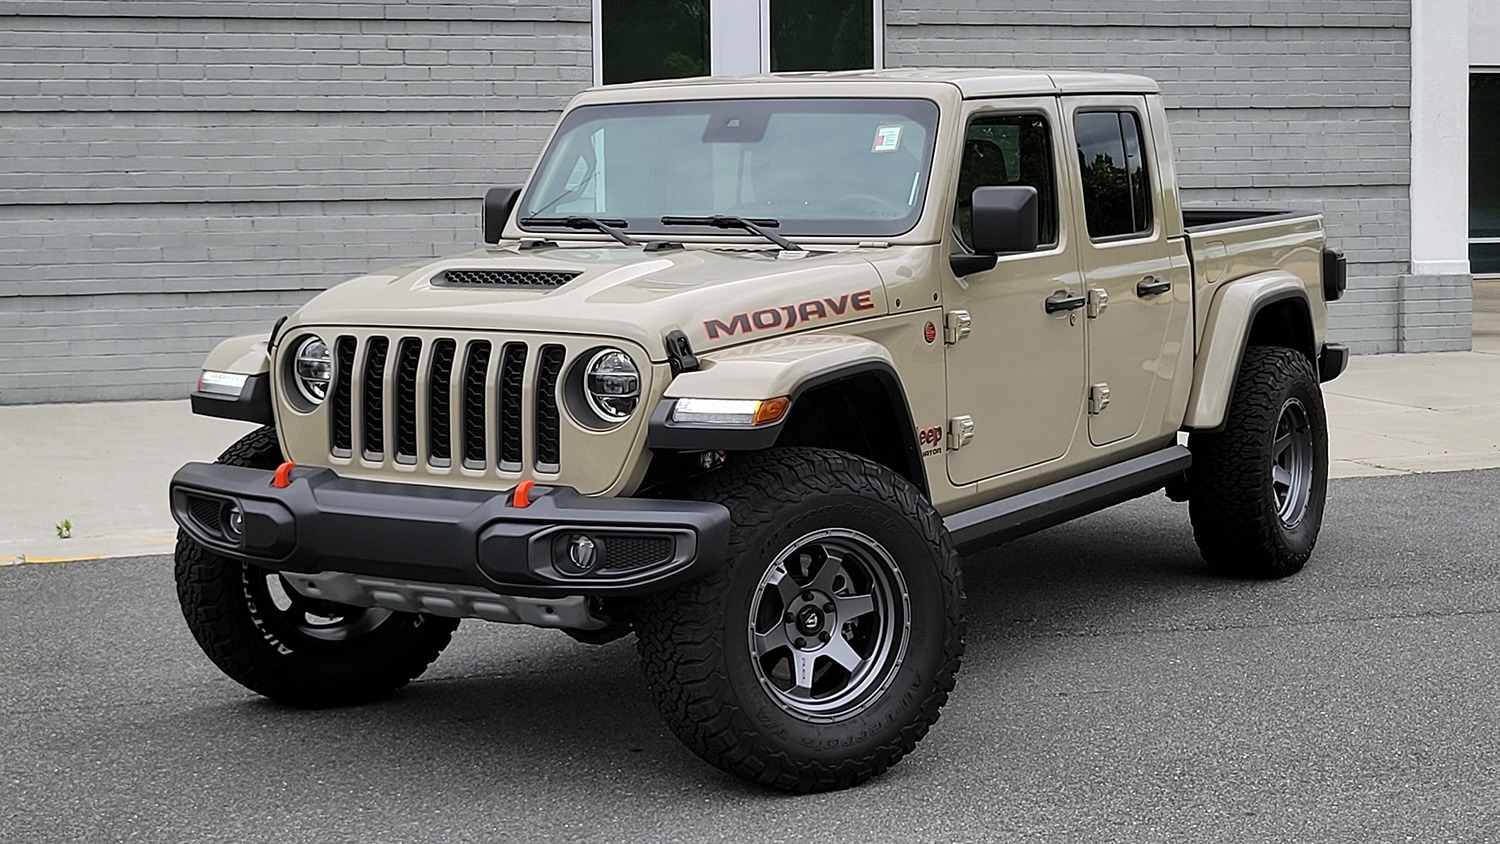 Used 2020 Jeep GLADIATOR MOJAVE 4X4 / 3.6L / AUTO / NAV / COLOR HARD-TOP / ALPINE / REARVIEW for sale $58,995 at Formula Imports in Charlotte NC 28227 109